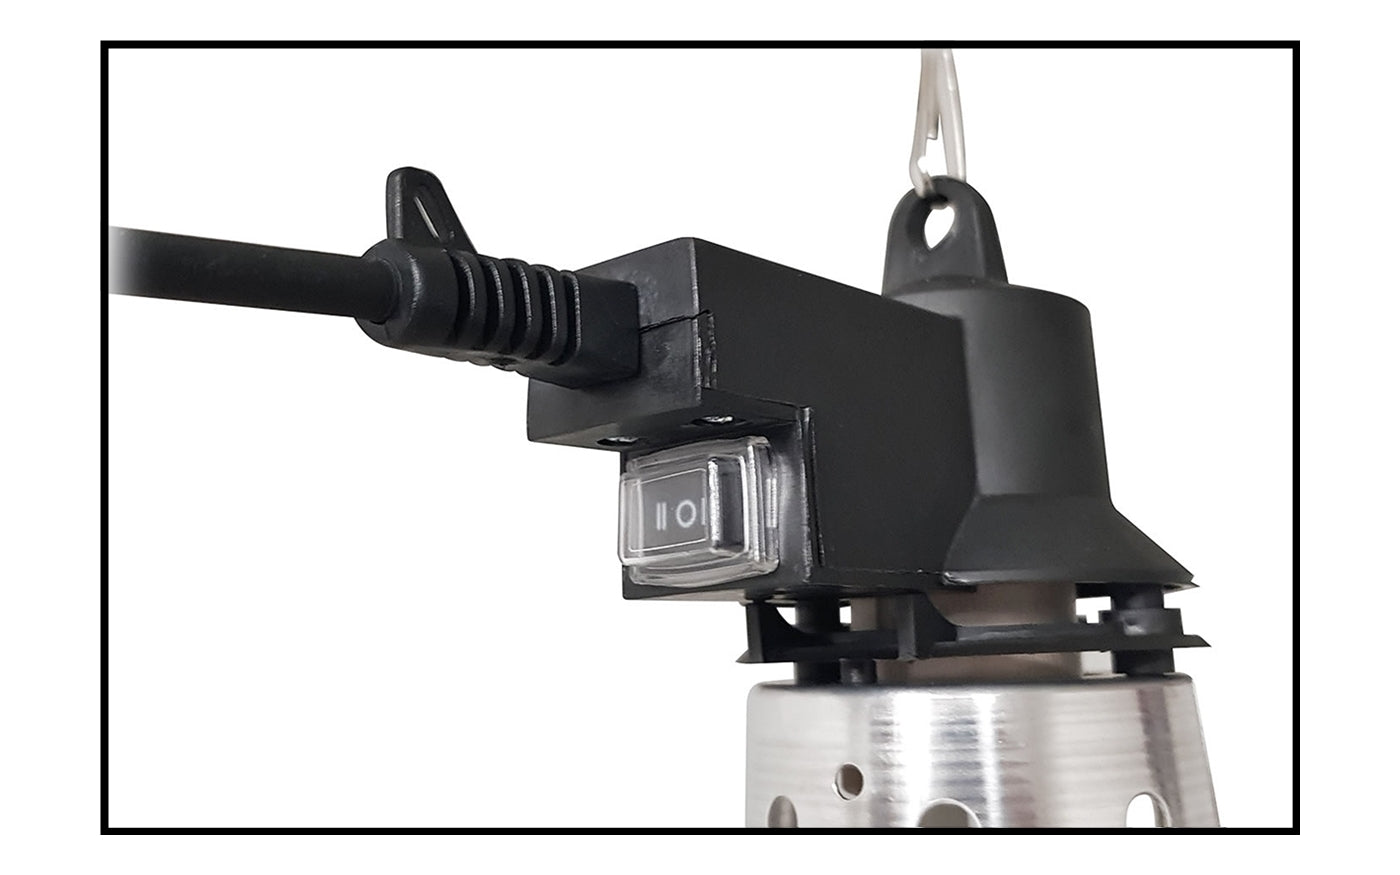 Pre-Wired Bulb Holder for Dull Emitter Bulbs with Reducer Switch - Buy Online SPR Centre UK